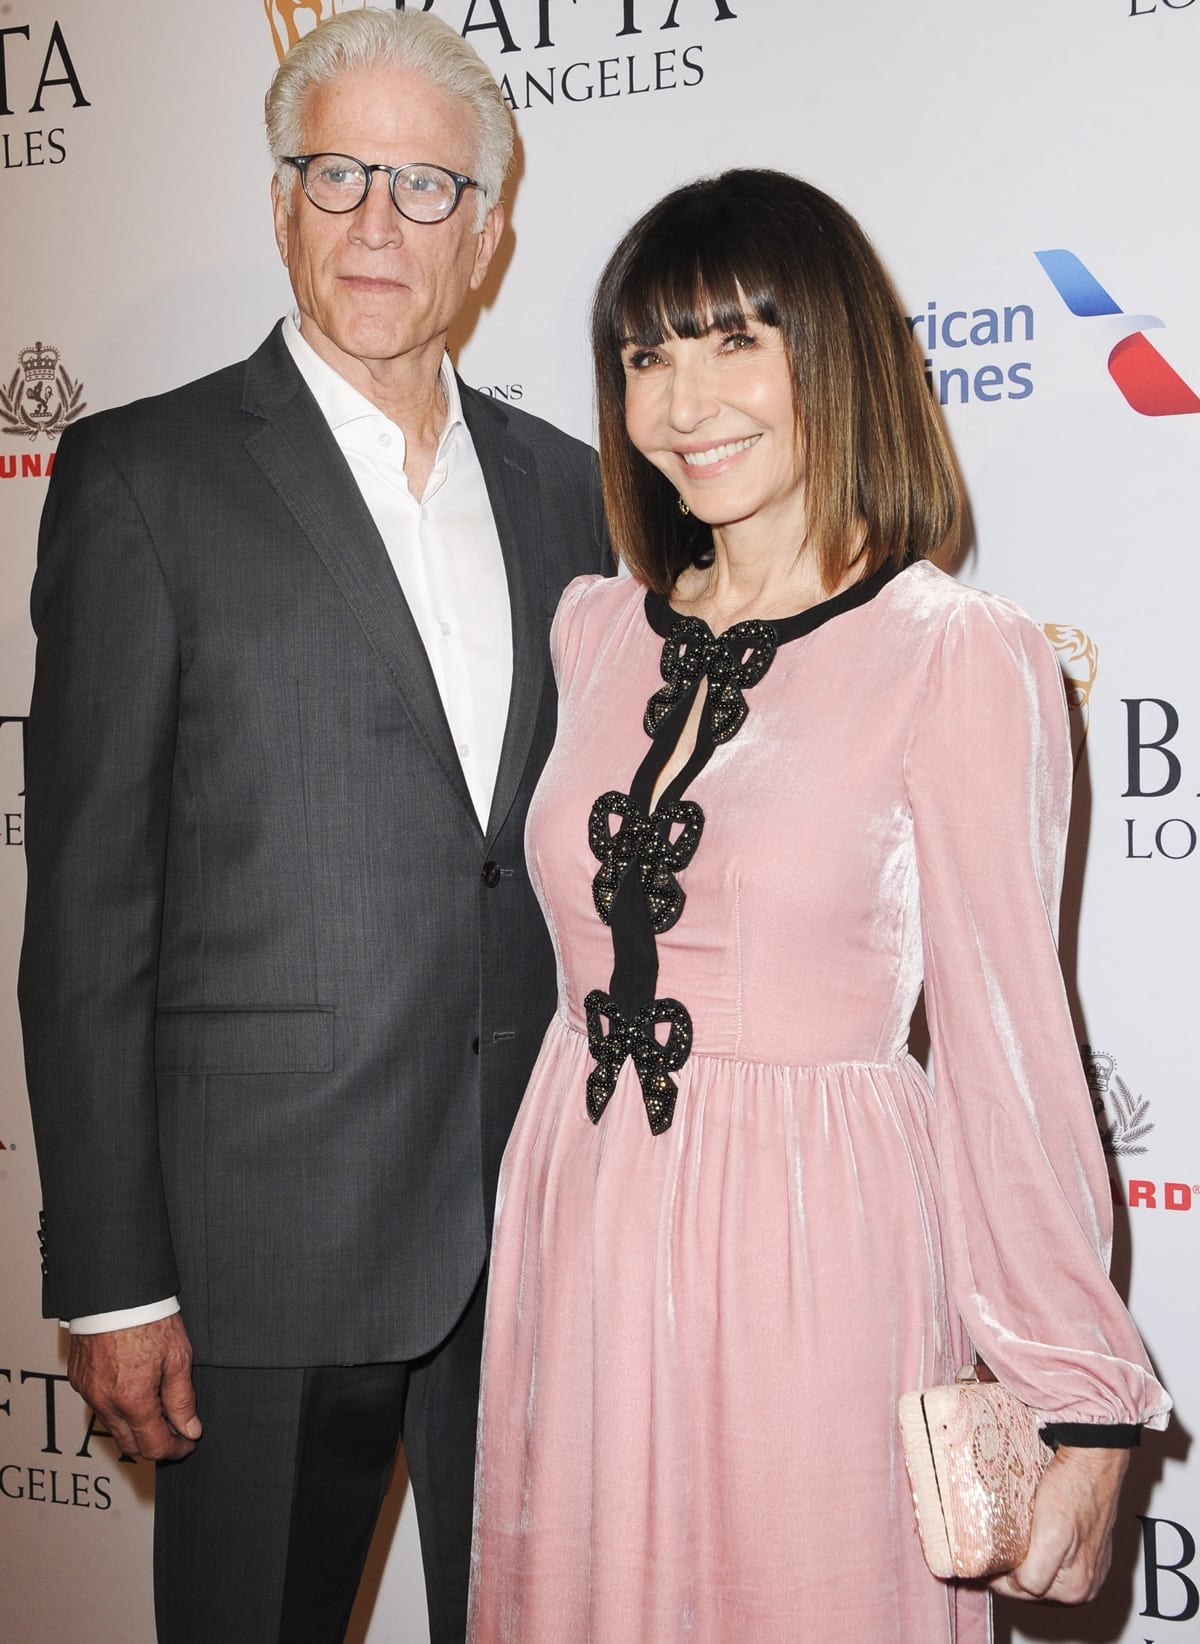 Ted Danson married actress Mary Steenburgen after meeting on the set of the movie Pontiac Moon